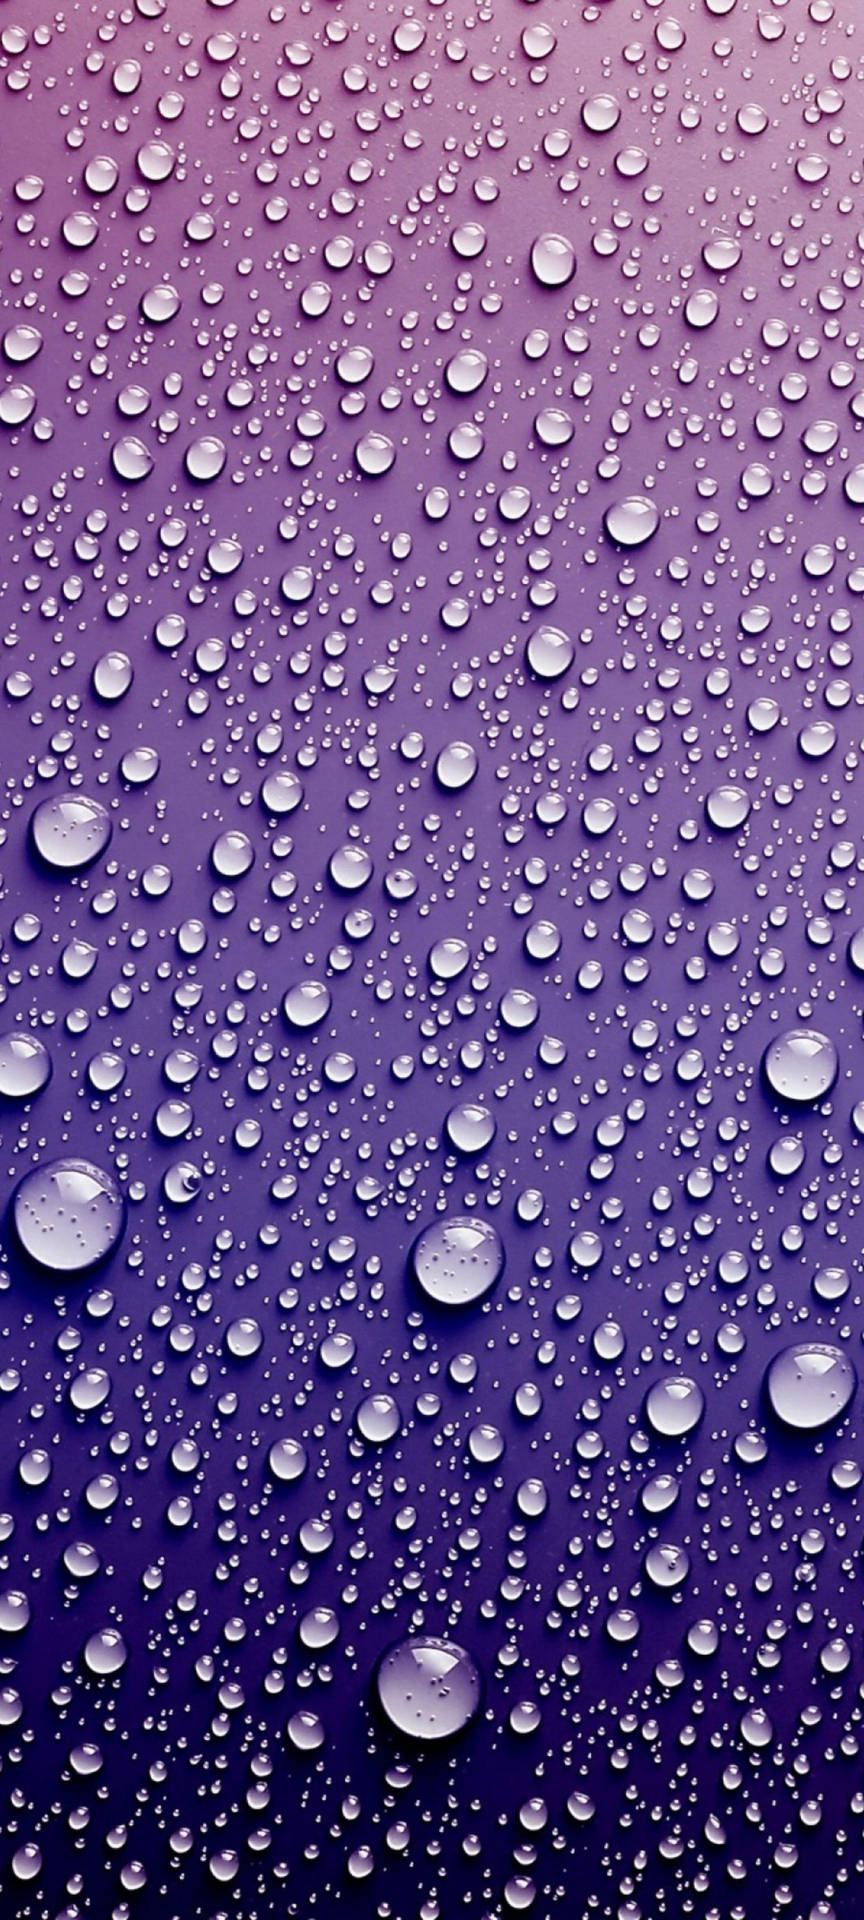 Samsung S21 Ultra with Soft Violet Droplets Wallpaper